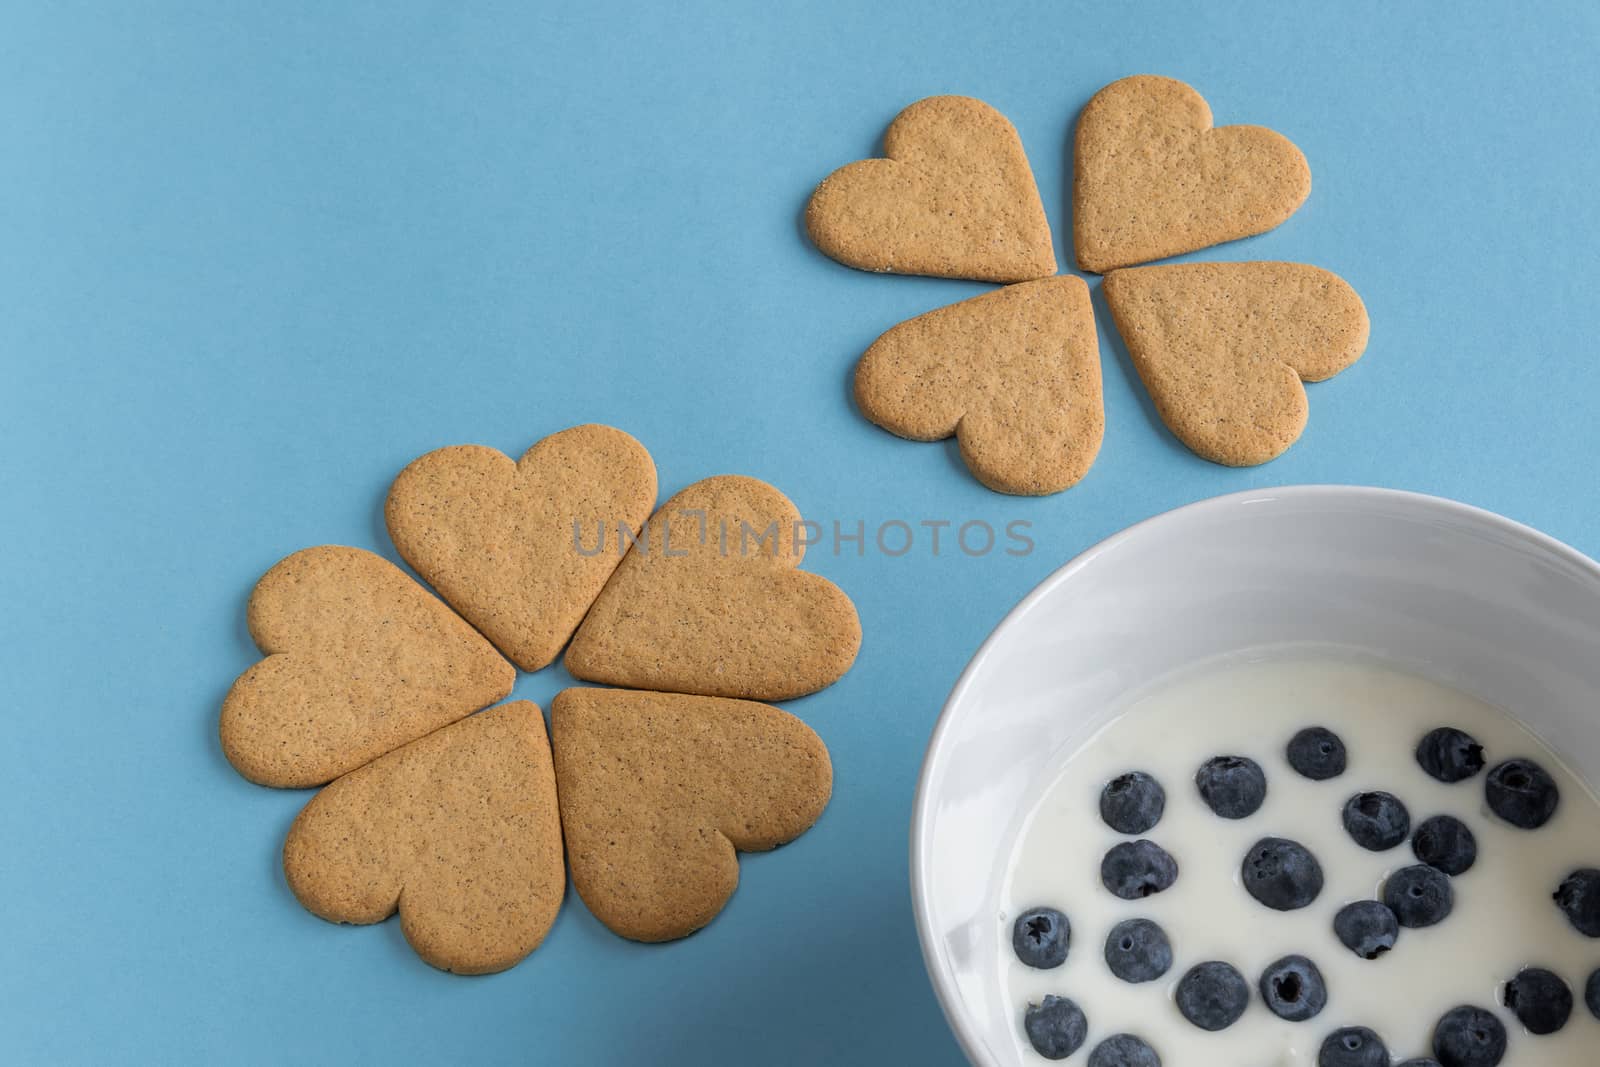 Breakfast. Close-up of heart shaped cookies like a flower petals. A bowl of yogurt with blueberries. Light blue background. Copy space.